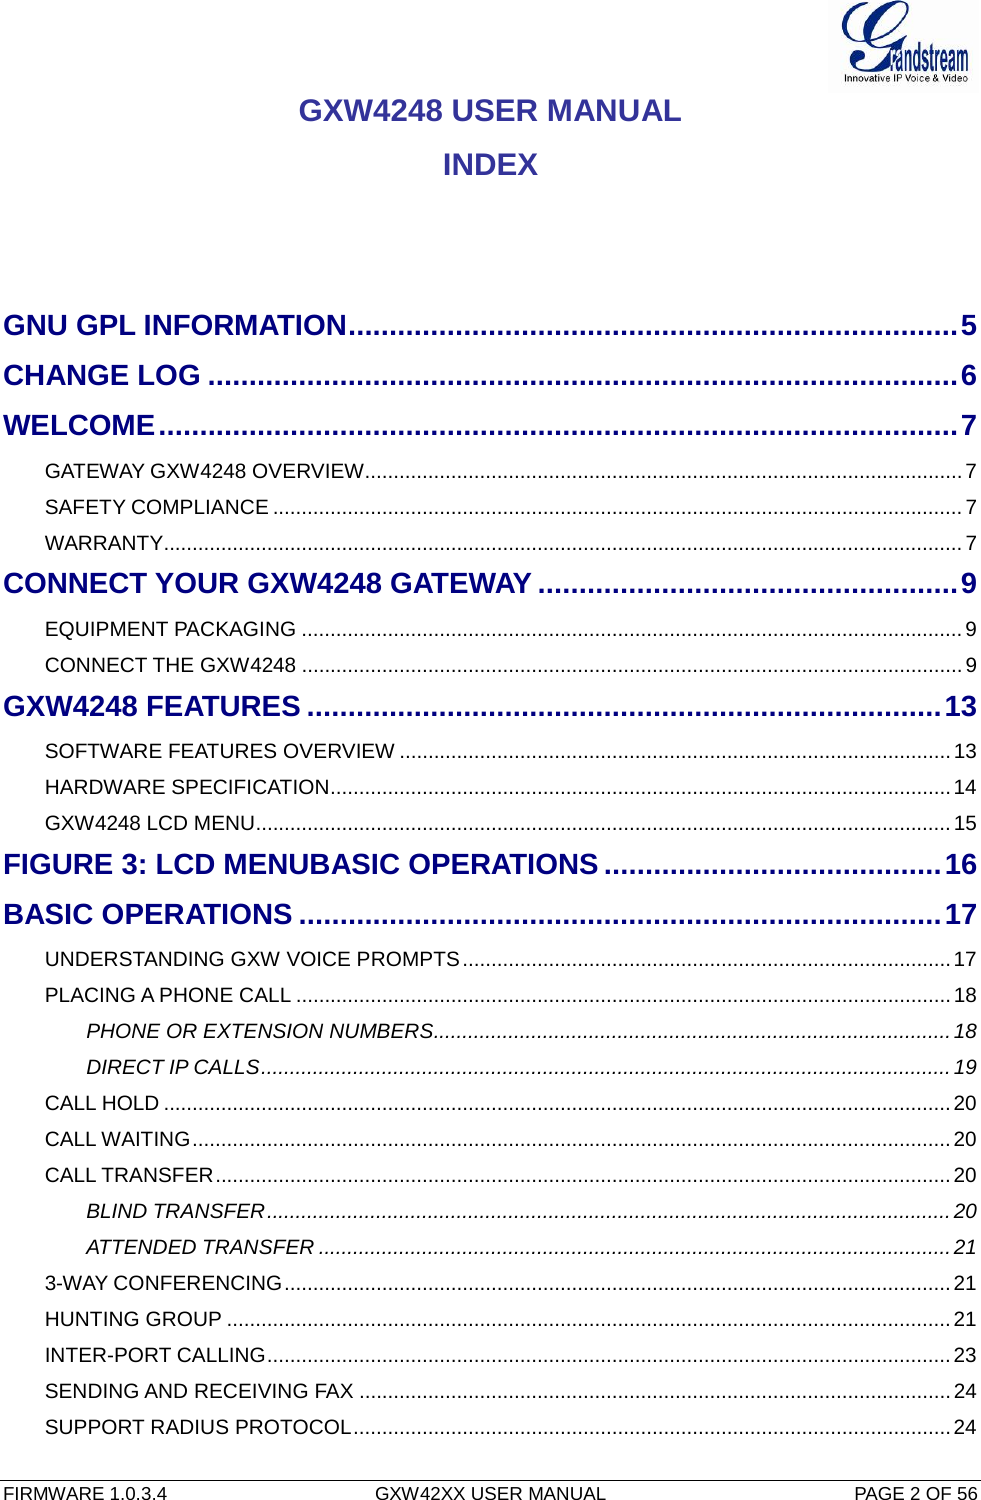  FIRMWARE 1.0.3.4  GXW42XX USER MANUAL  PAGE 2 OF 56     GXW4248 USER MANUAL INDEX    GNU GPL INFORMATION .......................................................................... 5 CHANGE LOG ........................................................................................... 6 WELCOME ................................................................................................. 7 GATEWAY GXW4248 OVERVIEW ........................................................................................................ 7 SAFETY COMPLIANCE ........................................................................................................................ 7 WARRANTY ........................................................................................................................................... 7 CONNECT YOUR GXW4248 GATEWAY ................................................... 9 EQUIPMENT PACKAGING ................................................................................................................... 9 CONNECT THE GXW4248 ................................................................................................................... 9 GXW4248 FEATURES ............................................................................. 13 SOFTWARE FEATURES OVERVIEW ................................................................................................ 13 HARDWARE SPECIFICATION ............................................................................................................ 14 GXW4248 LCD MENU......................................................................................................................... 15 FIGURE 3: LCD MENUBASIC OPERATIONS ......................................... 16 BASIC OPERATIONS .............................................................................. 17 UNDERSTANDING GXW VOICE PROMPTS ..................................................................................... 17 PLACING A PHONE CALL .................................................................................................................. 18 PHONE OR EXTENSION NUMBERS .......................................................................................... 18 DIRECT IP CALLS ........................................................................................................................ 19 CALL HOLD ......................................................................................................................................... 20 CALL WAITING .................................................................................................................................... 20 CALL TRANSFER ................................................................................................................................ 20 BLIND TRANSFER ....................................................................................................................... 20 ATTENDED TRANSFER .............................................................................................................. 21 3-WAY CONFERENCING .................................................................................................................... 21 HUNTING GROUP .............................................................................................................................. 21 INTER-PORT CALLING ....................................................................................................................... 23 SENDING AND RECEIVING FAX ....................................................................................................... 24 SUPPORT RADIUS PROTOCOL ........................................................................................................ 24 